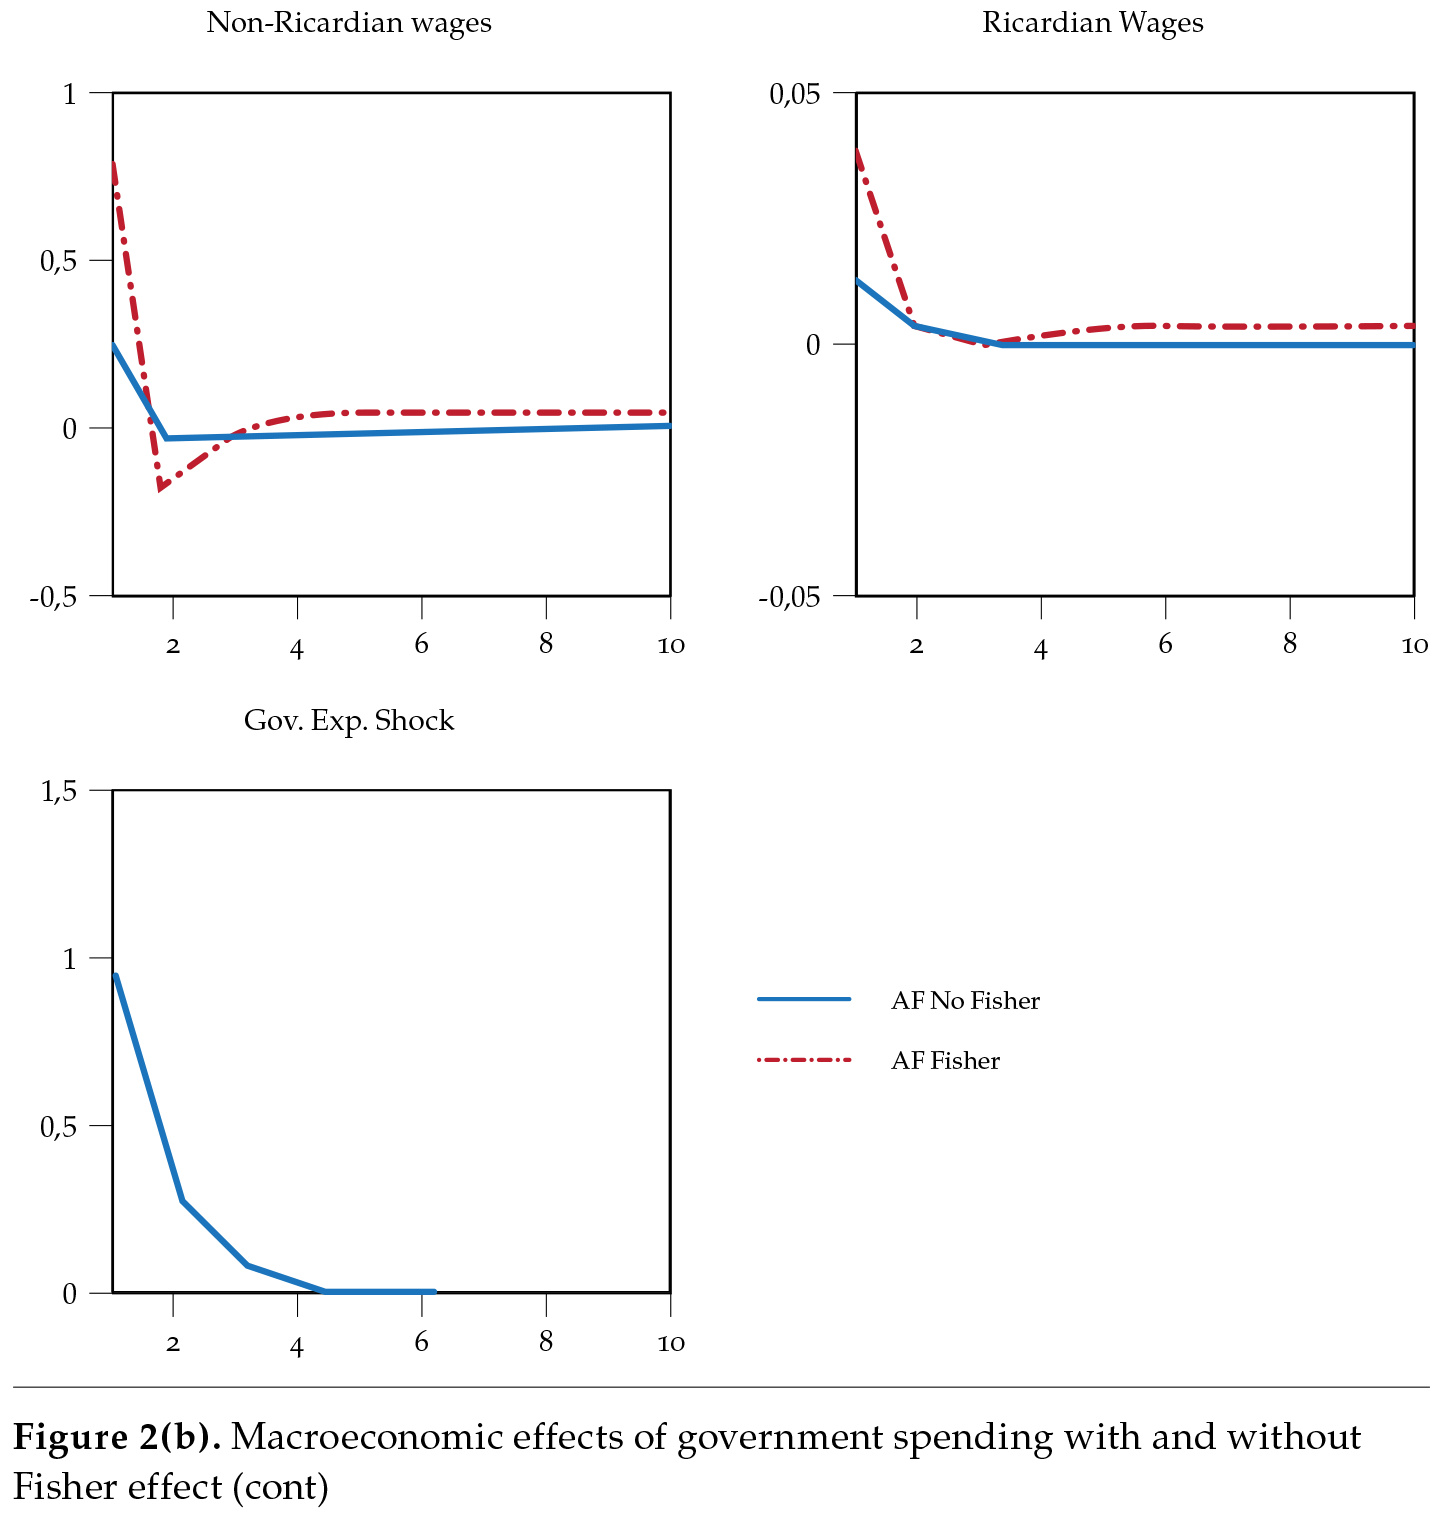 Macroeconomic effects of government spending with and without Fisher effect (cont)